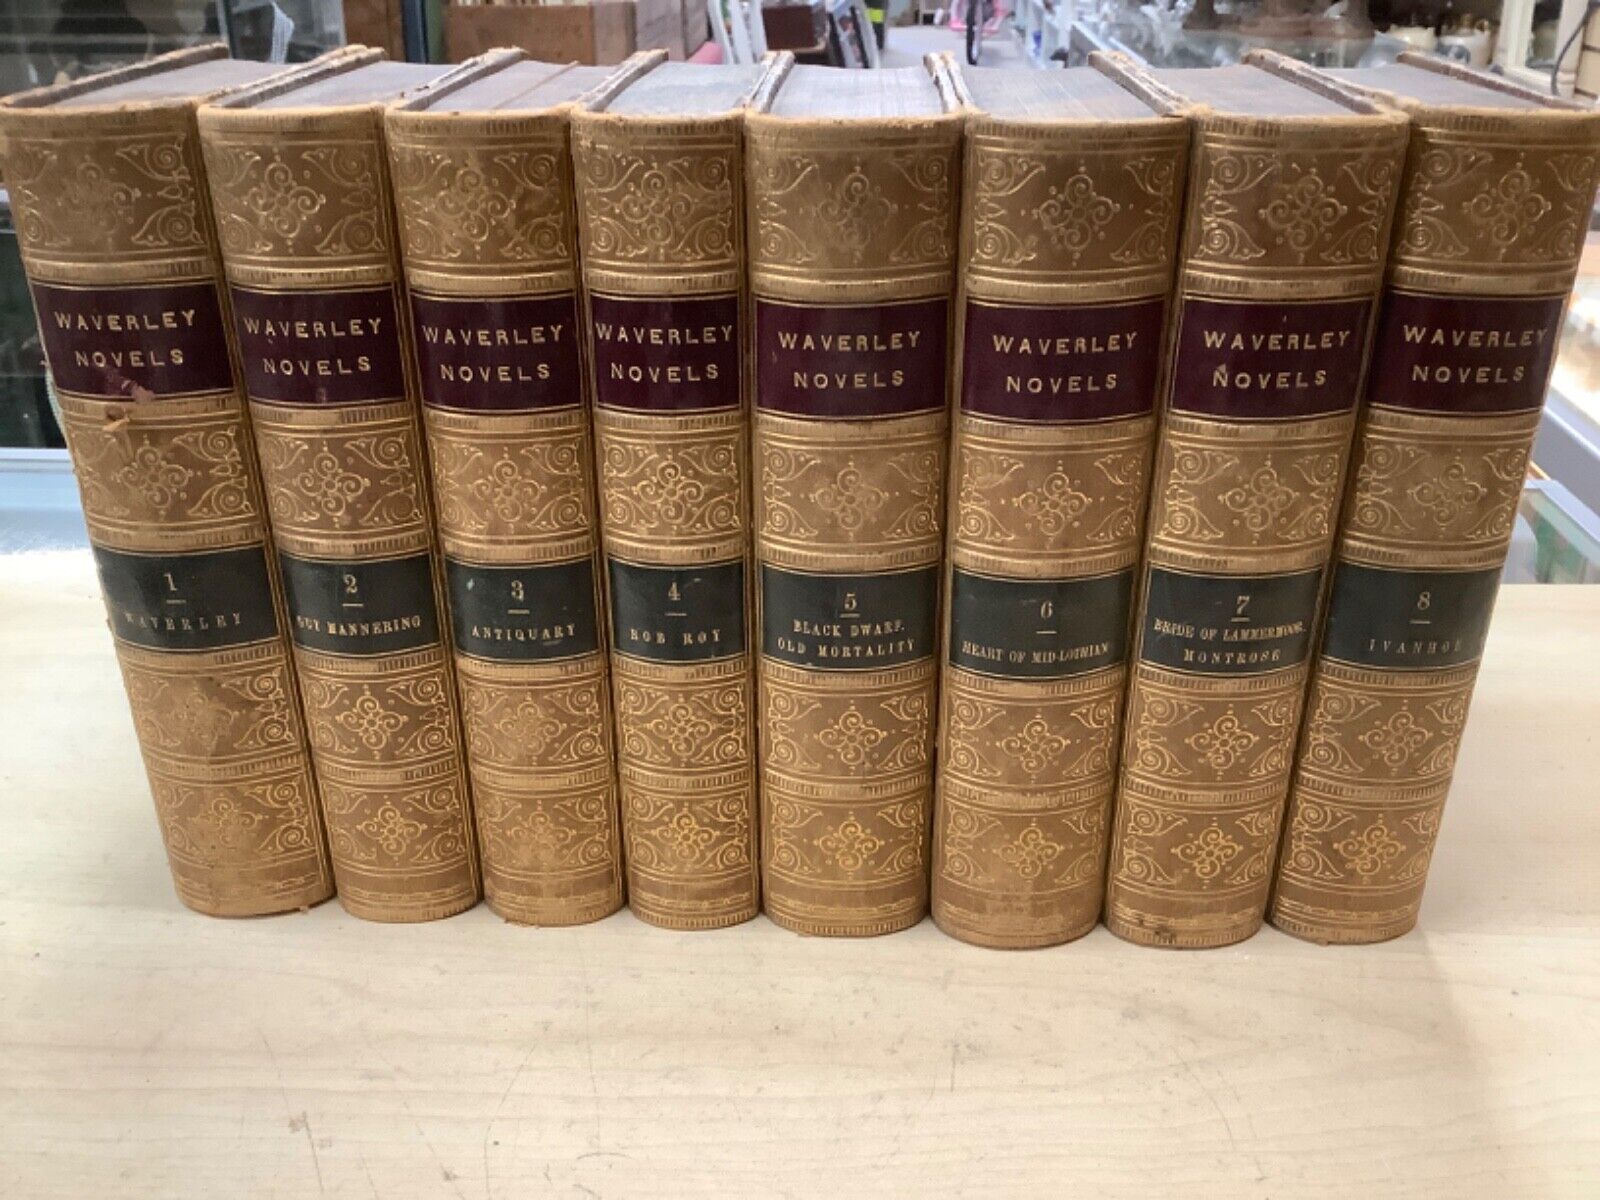 1850's waverley novels 1-28 collection - previously owned fair condition